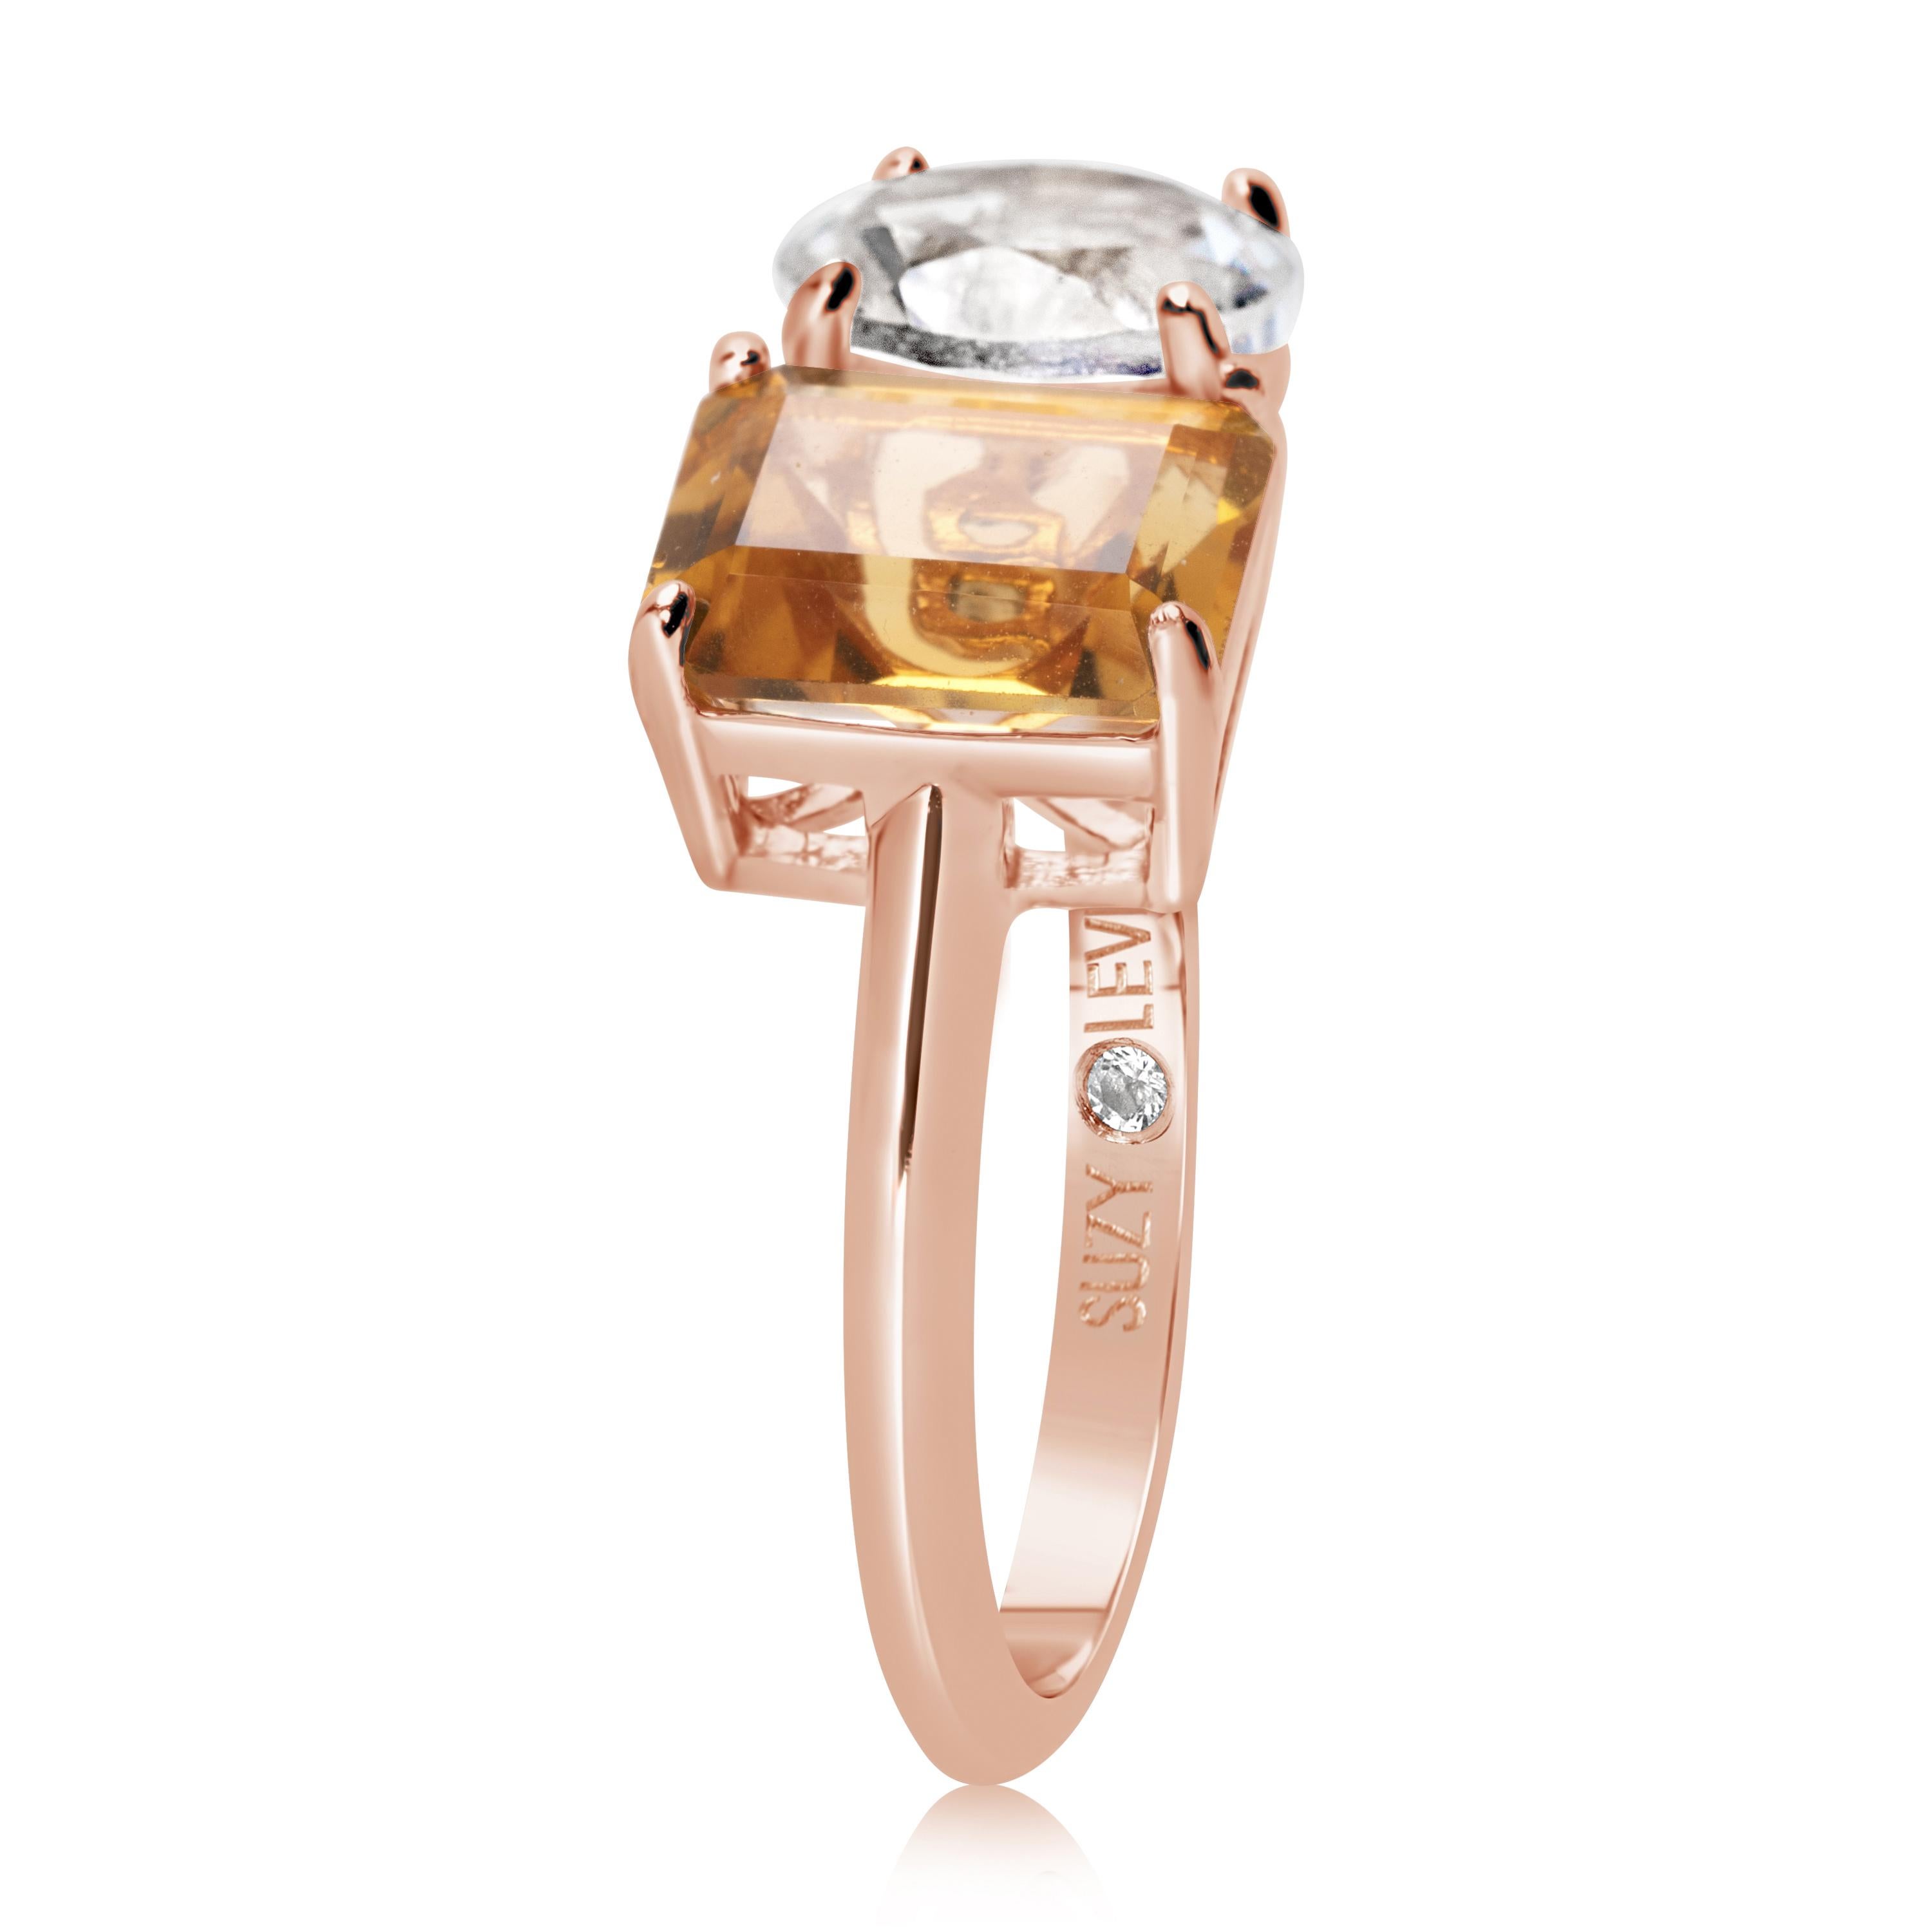 Shimmering in hues of white and orange, this Suzy Levian ring is as on trend as can be, and features a round cut white topaz and an emerald cut orange citrine as a perfectly matched pair. This ring symbolizes a perfect pairing of unique shapes. This